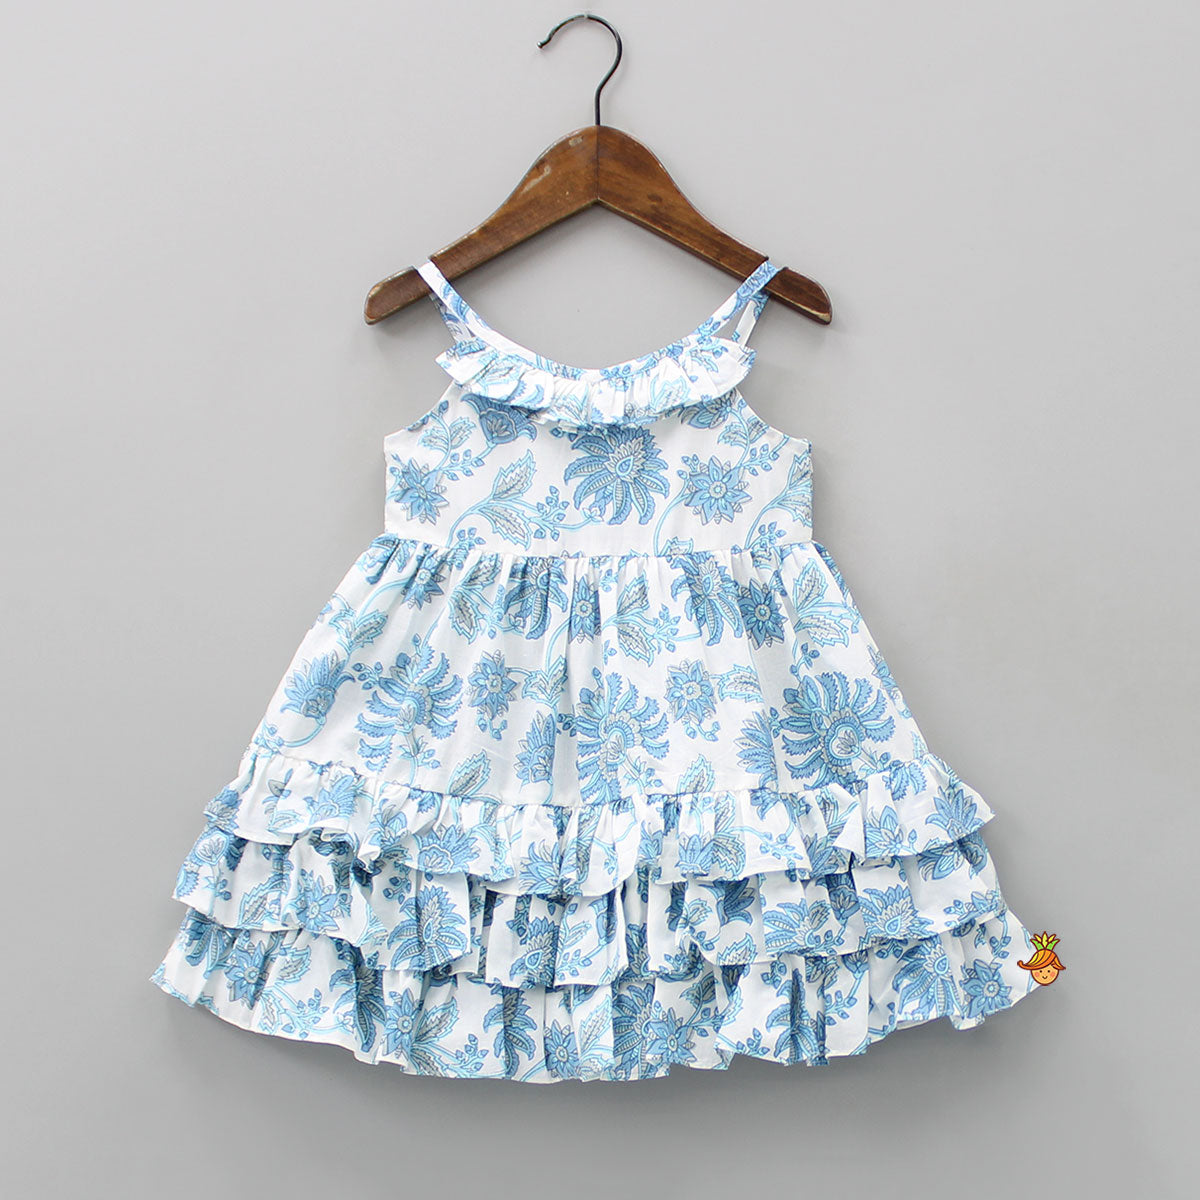 Pre Order: Floral Printed Frilly Layered Dress